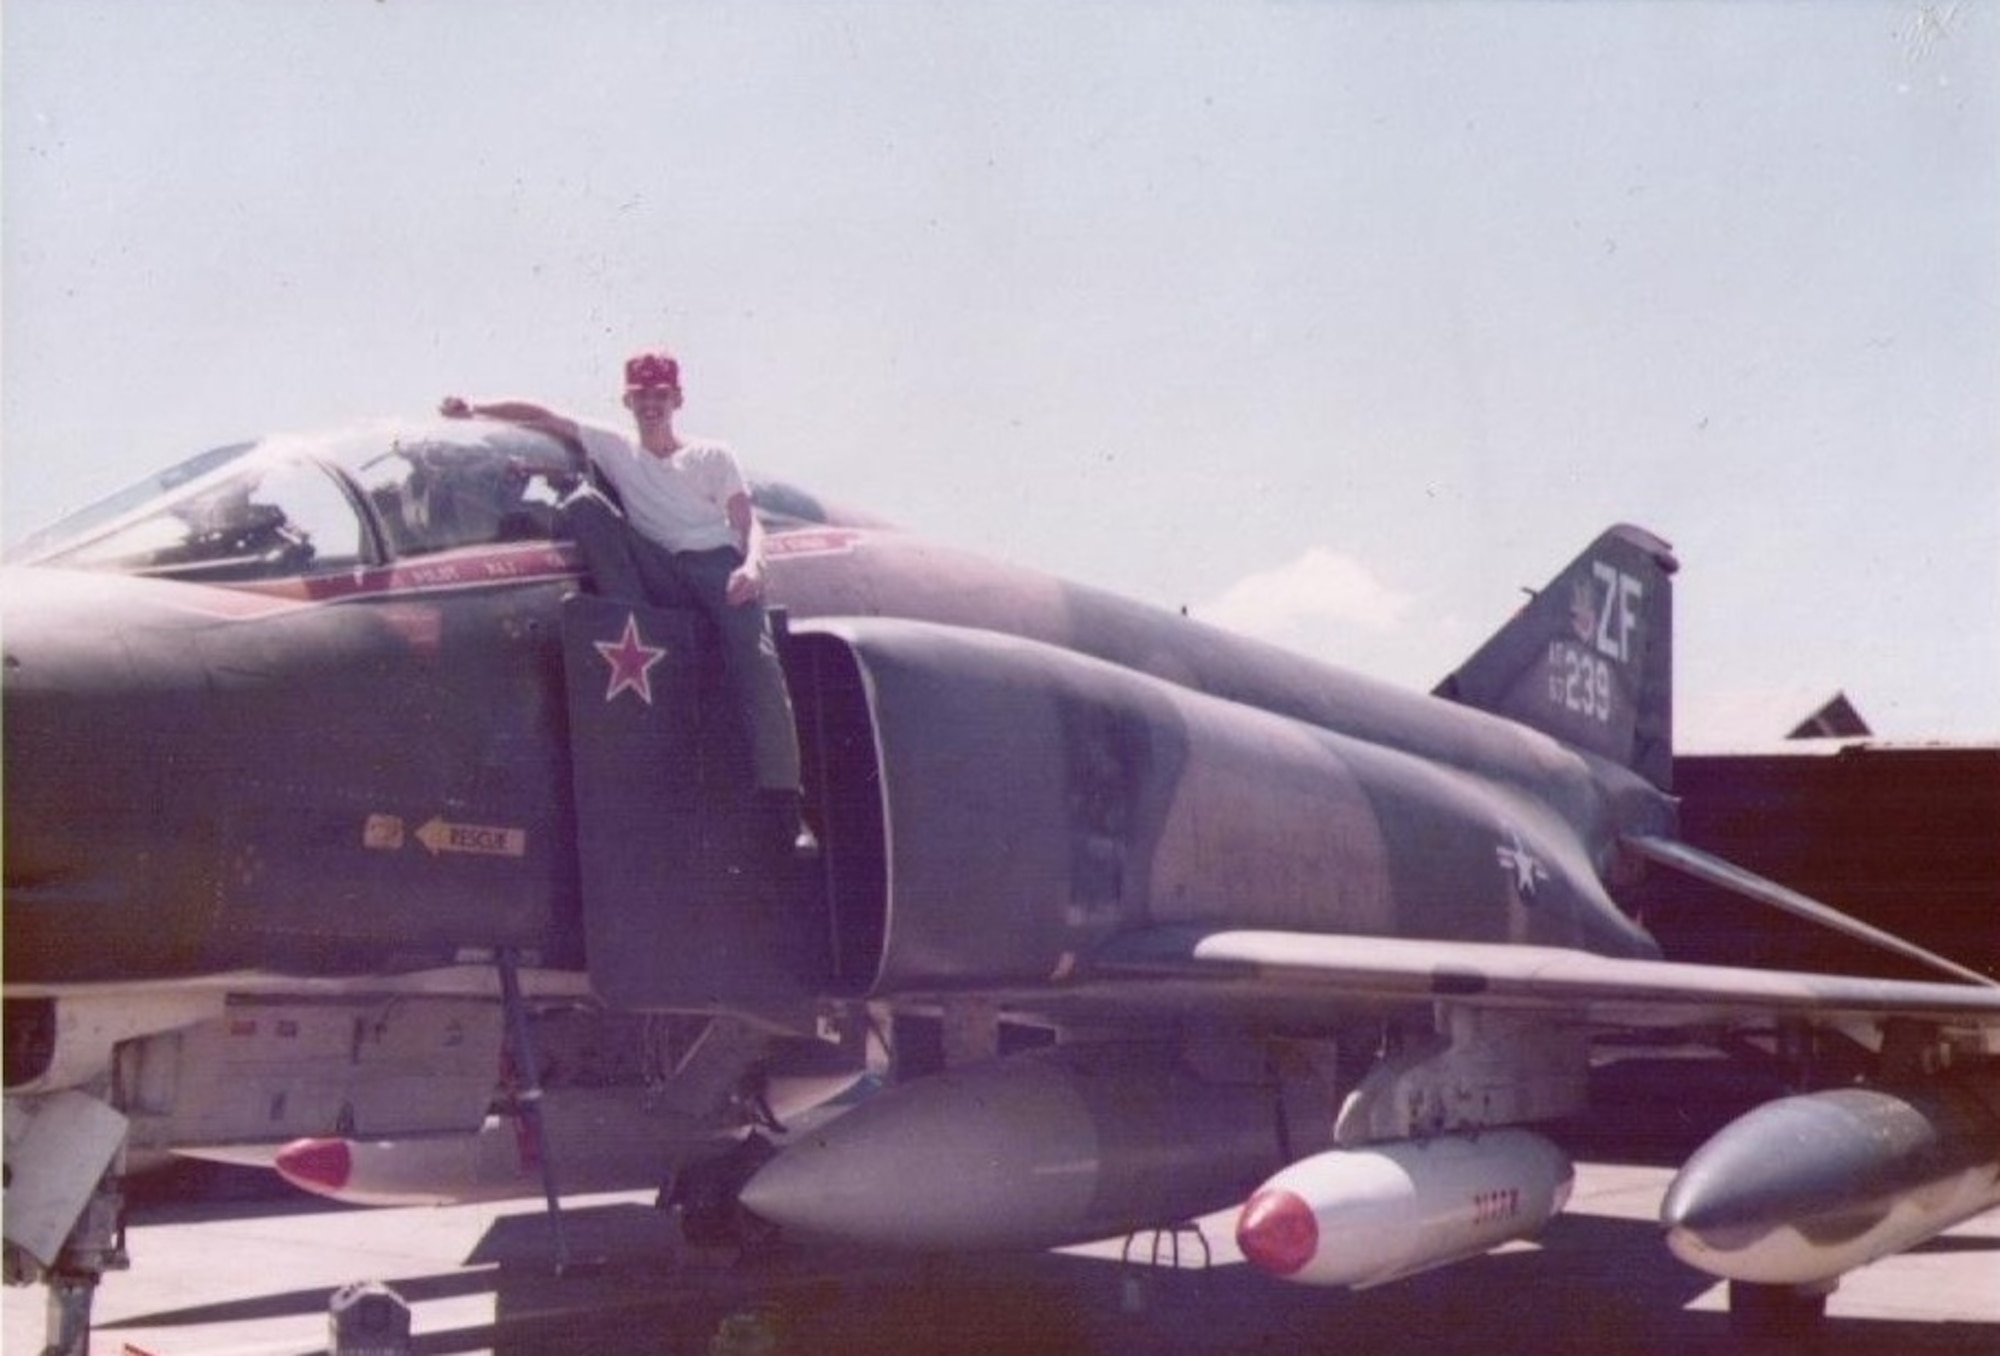 Airman William Pook poses with a “MiG Killer” F-4 Phantom while assigned to the 307th Tactical Fighter Squadron at Udorn Royal Thai Air Force Base, Thailand, in 1972. Pook earned the Vietnam Gallantry Cross for “heroism and gallantry in combat against enemy forces” during an attack on the base Oct. 3, 1972. Pook, a reservist assigned to the 633rd Civil Engineer Squadron at Langley Air Force Base, Va., retired as a master sergeant on Sept. 23, 2011, after 40 years of service in the Air Force. (Courtesy photo/William Pook)